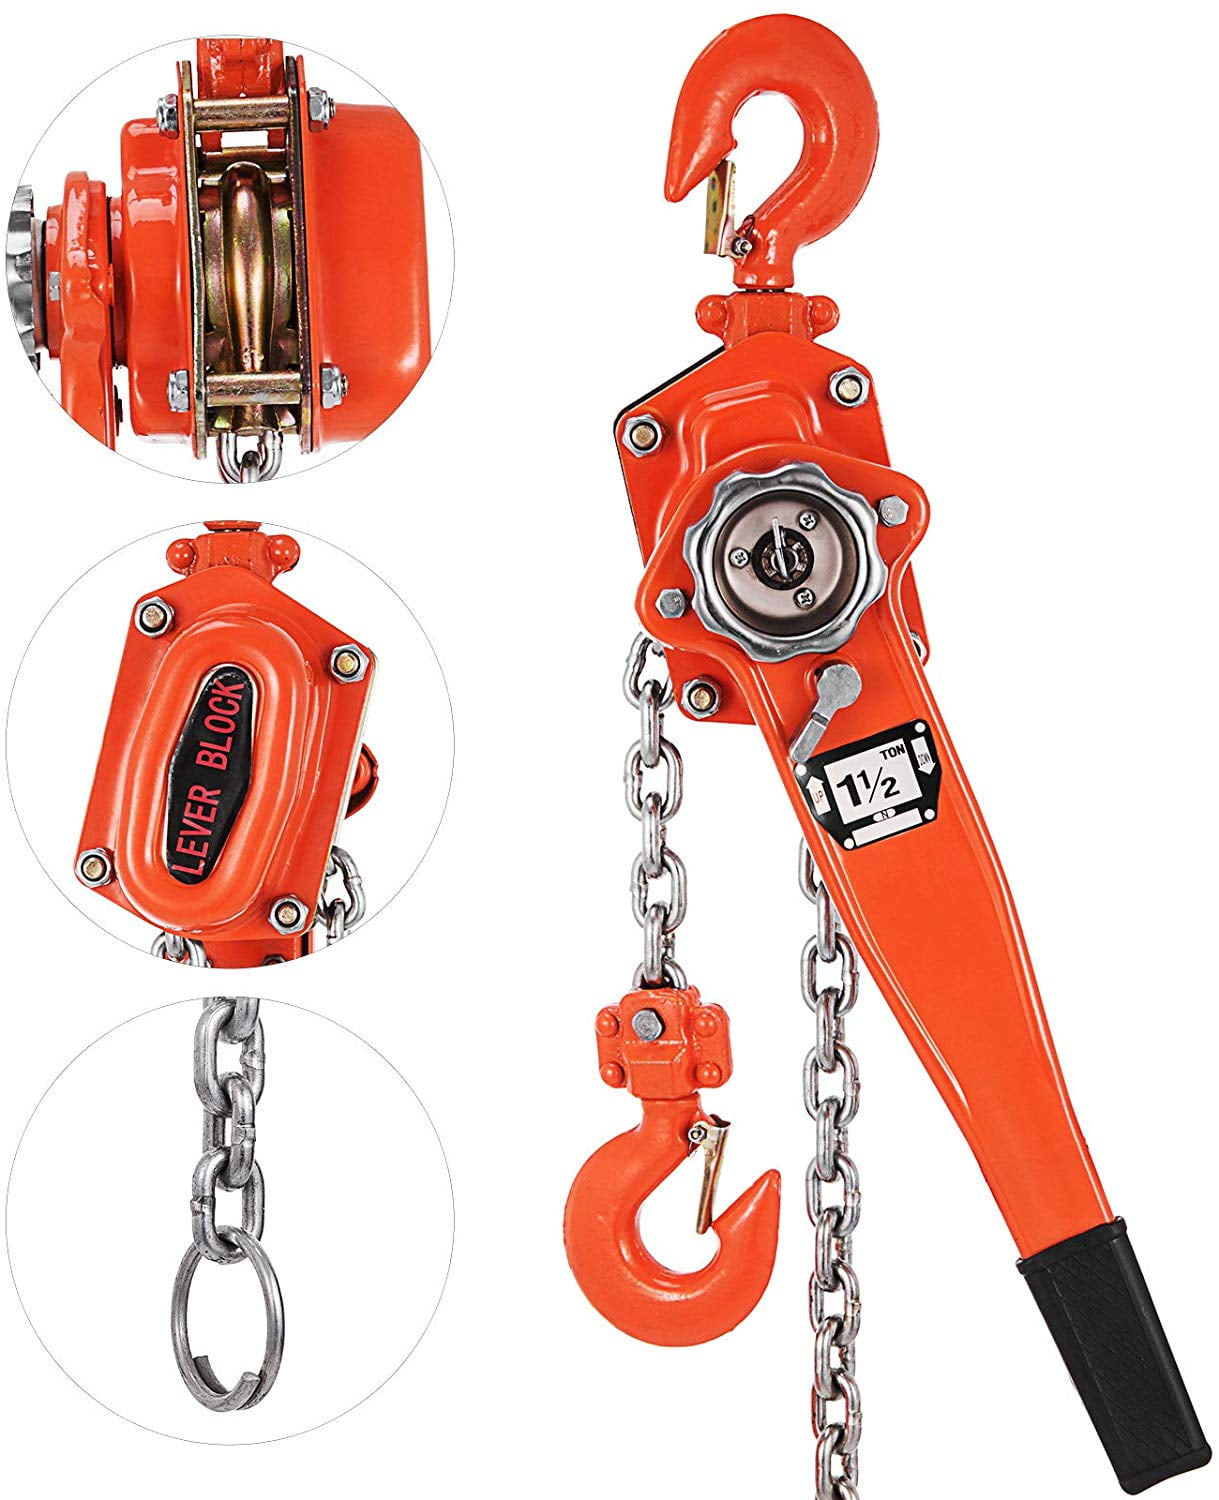 1-1/2TON 20FT RATCHETING LEVER BLOCK CHAIN HOIST COME ALONG PULLER PULLEY USA 